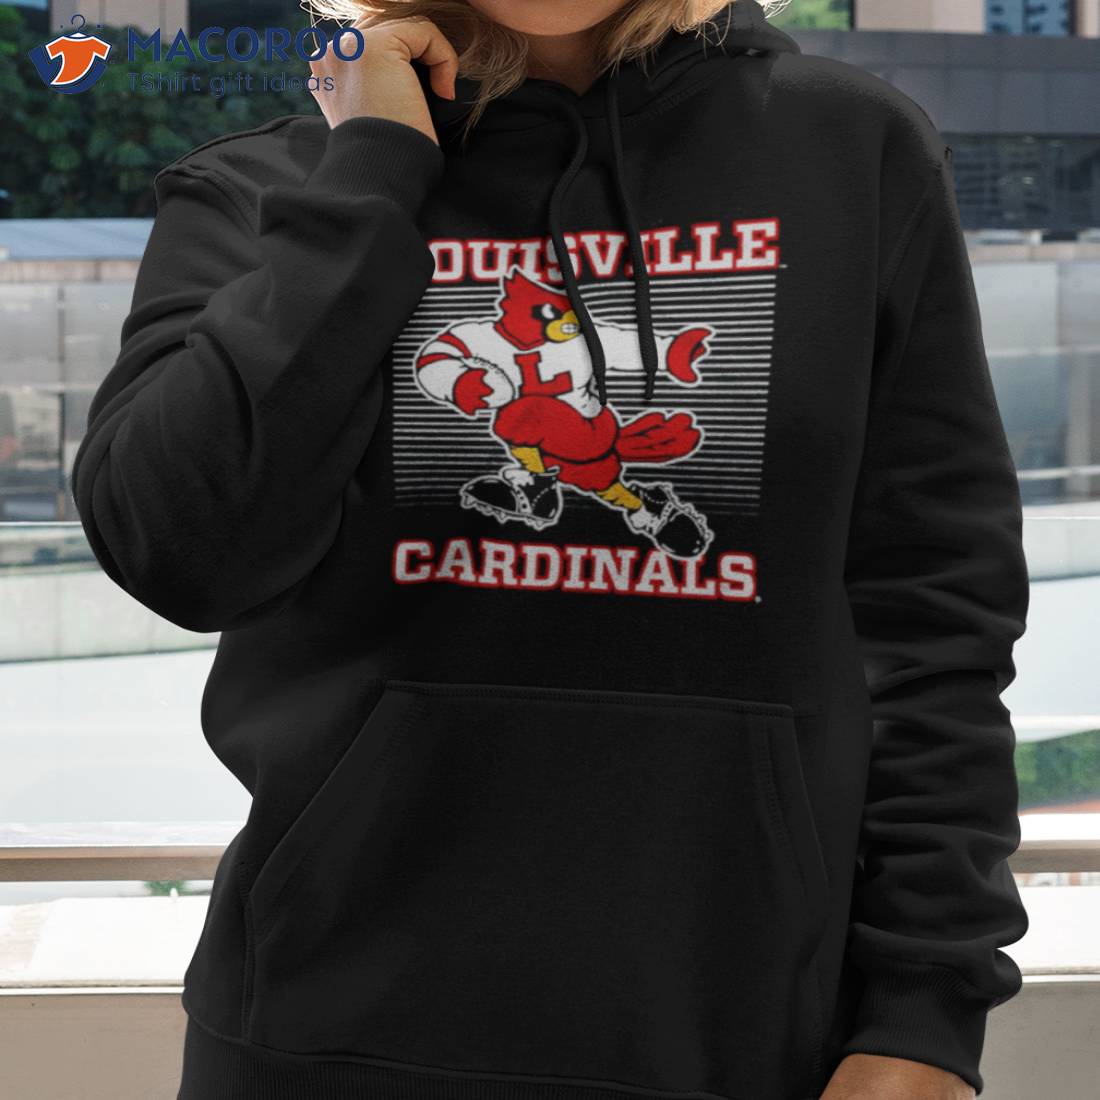 Louisville Cardinals Sweatshirt Hoodie Gifts For NCAA Fans by